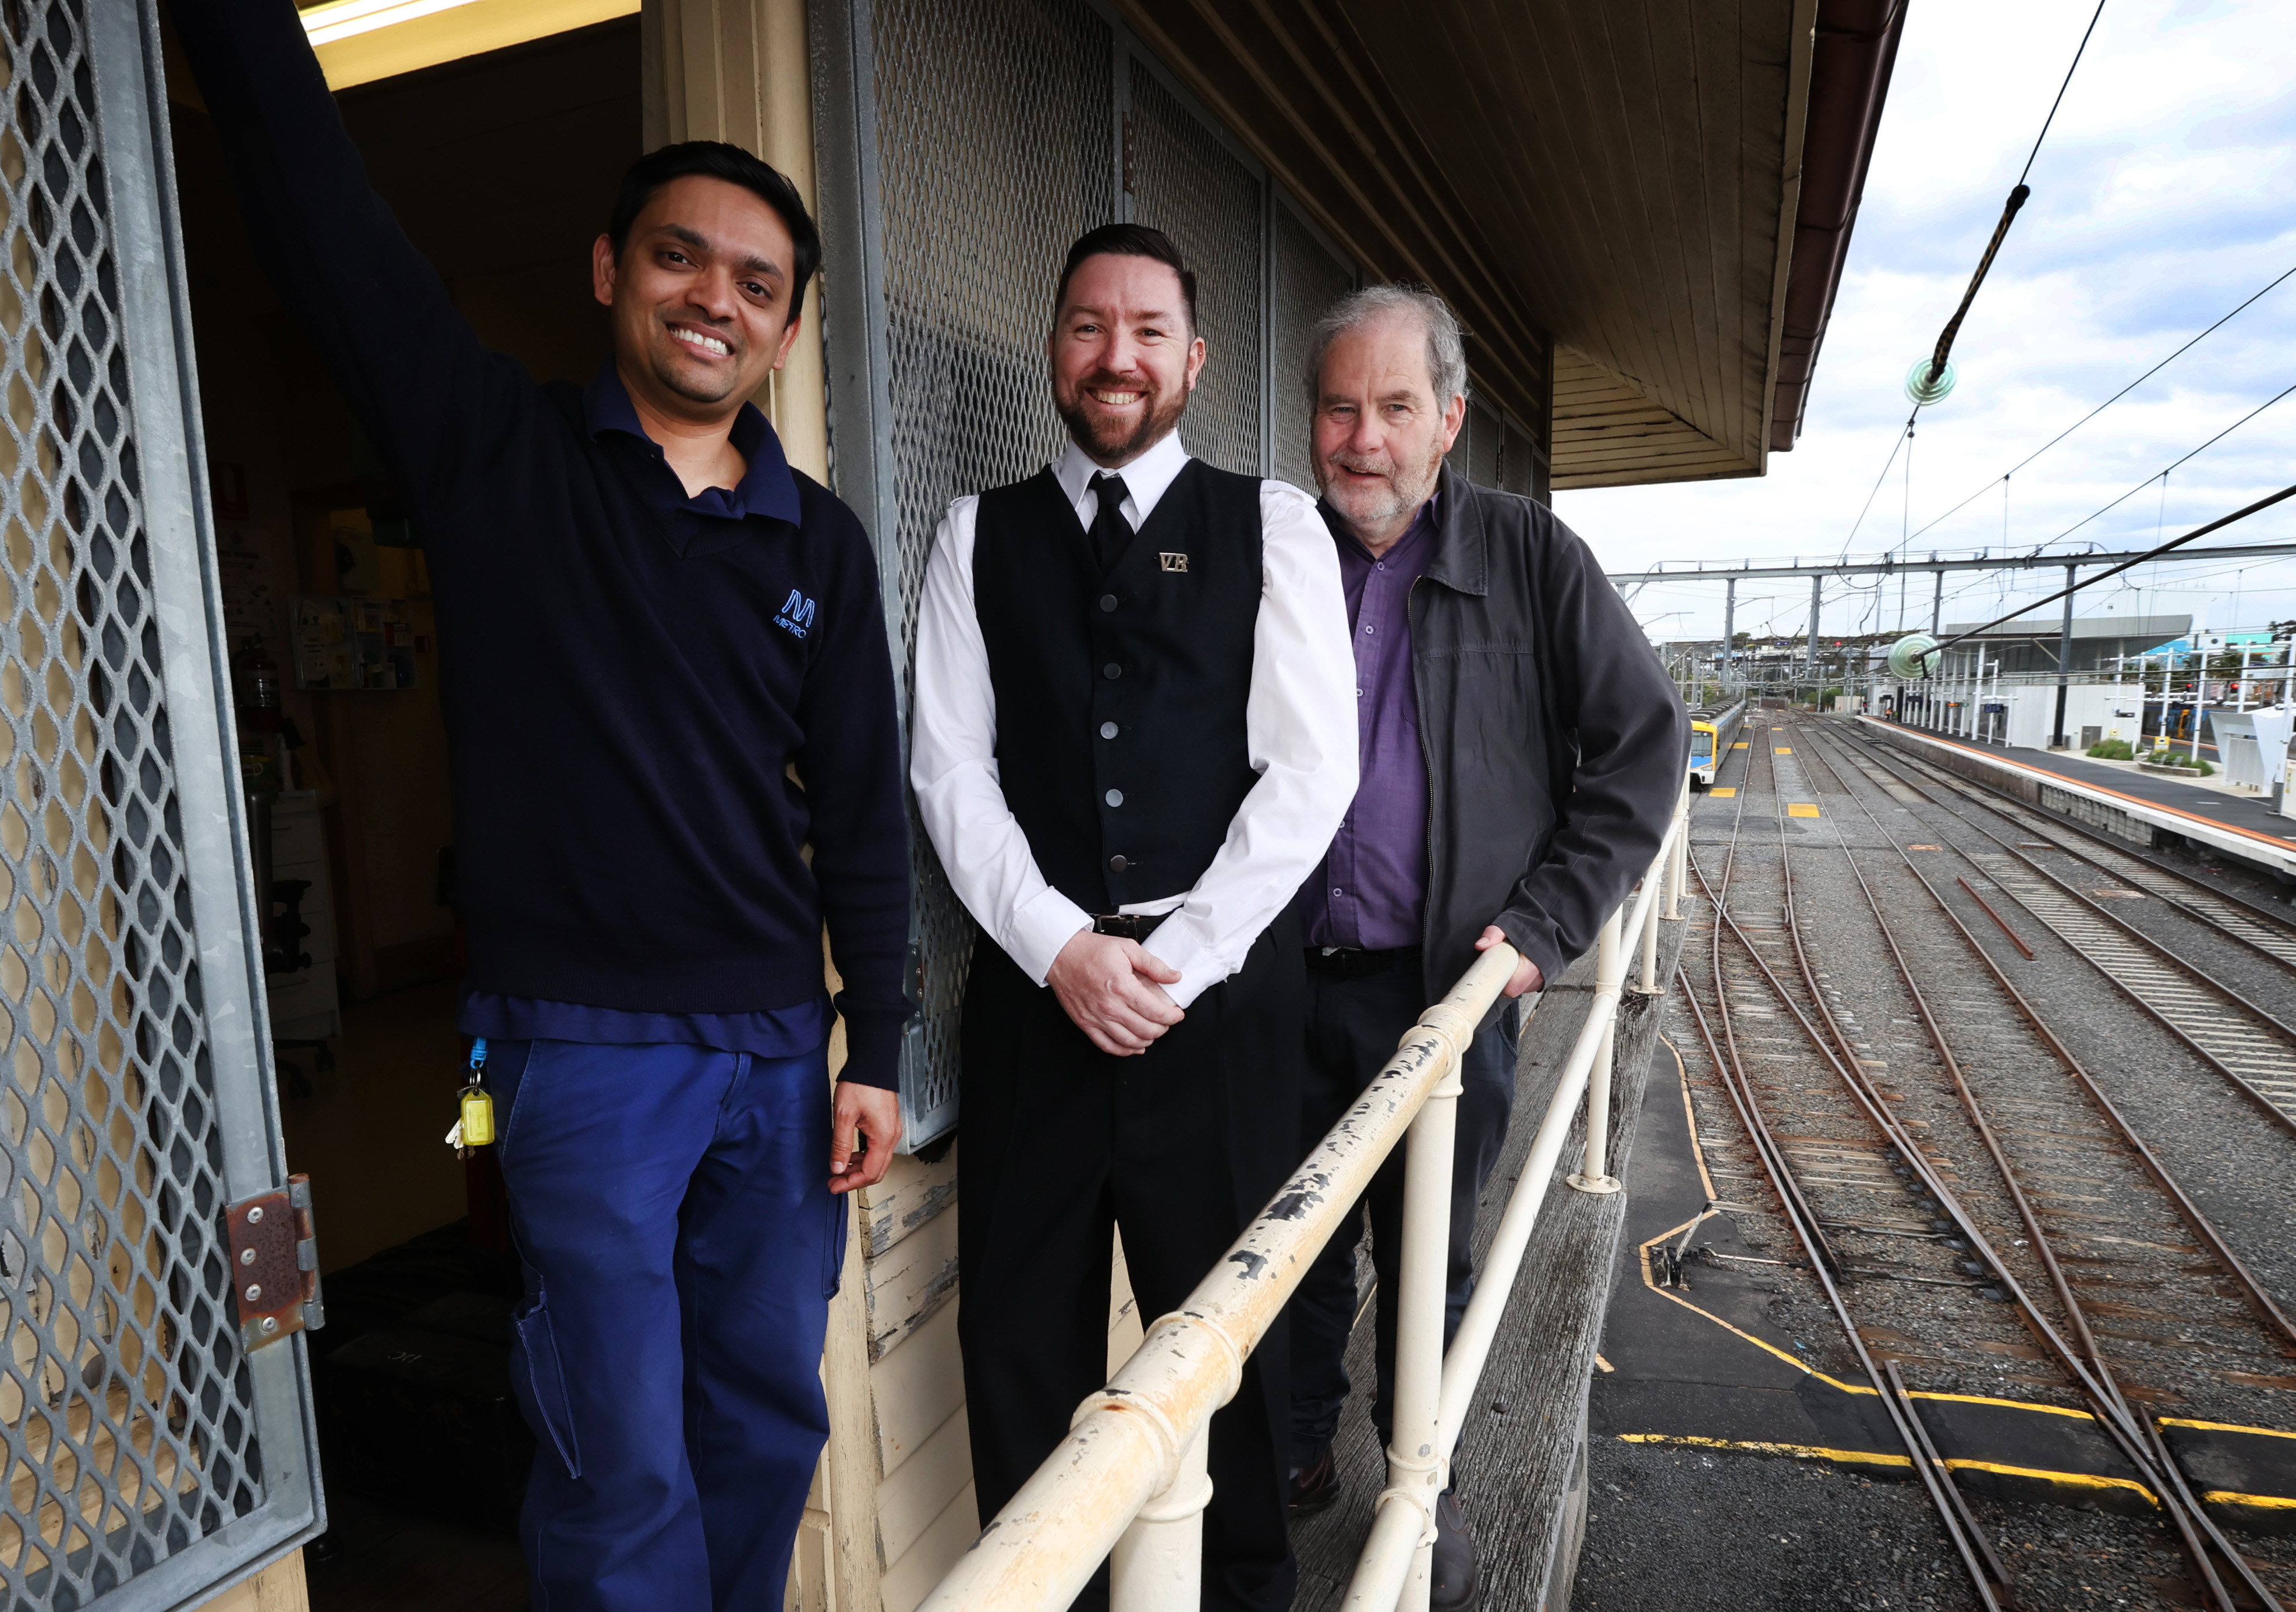 Signallers of the Frankston signal box past and present got together in uniforms from throughout the decades to celebrate the milestone.